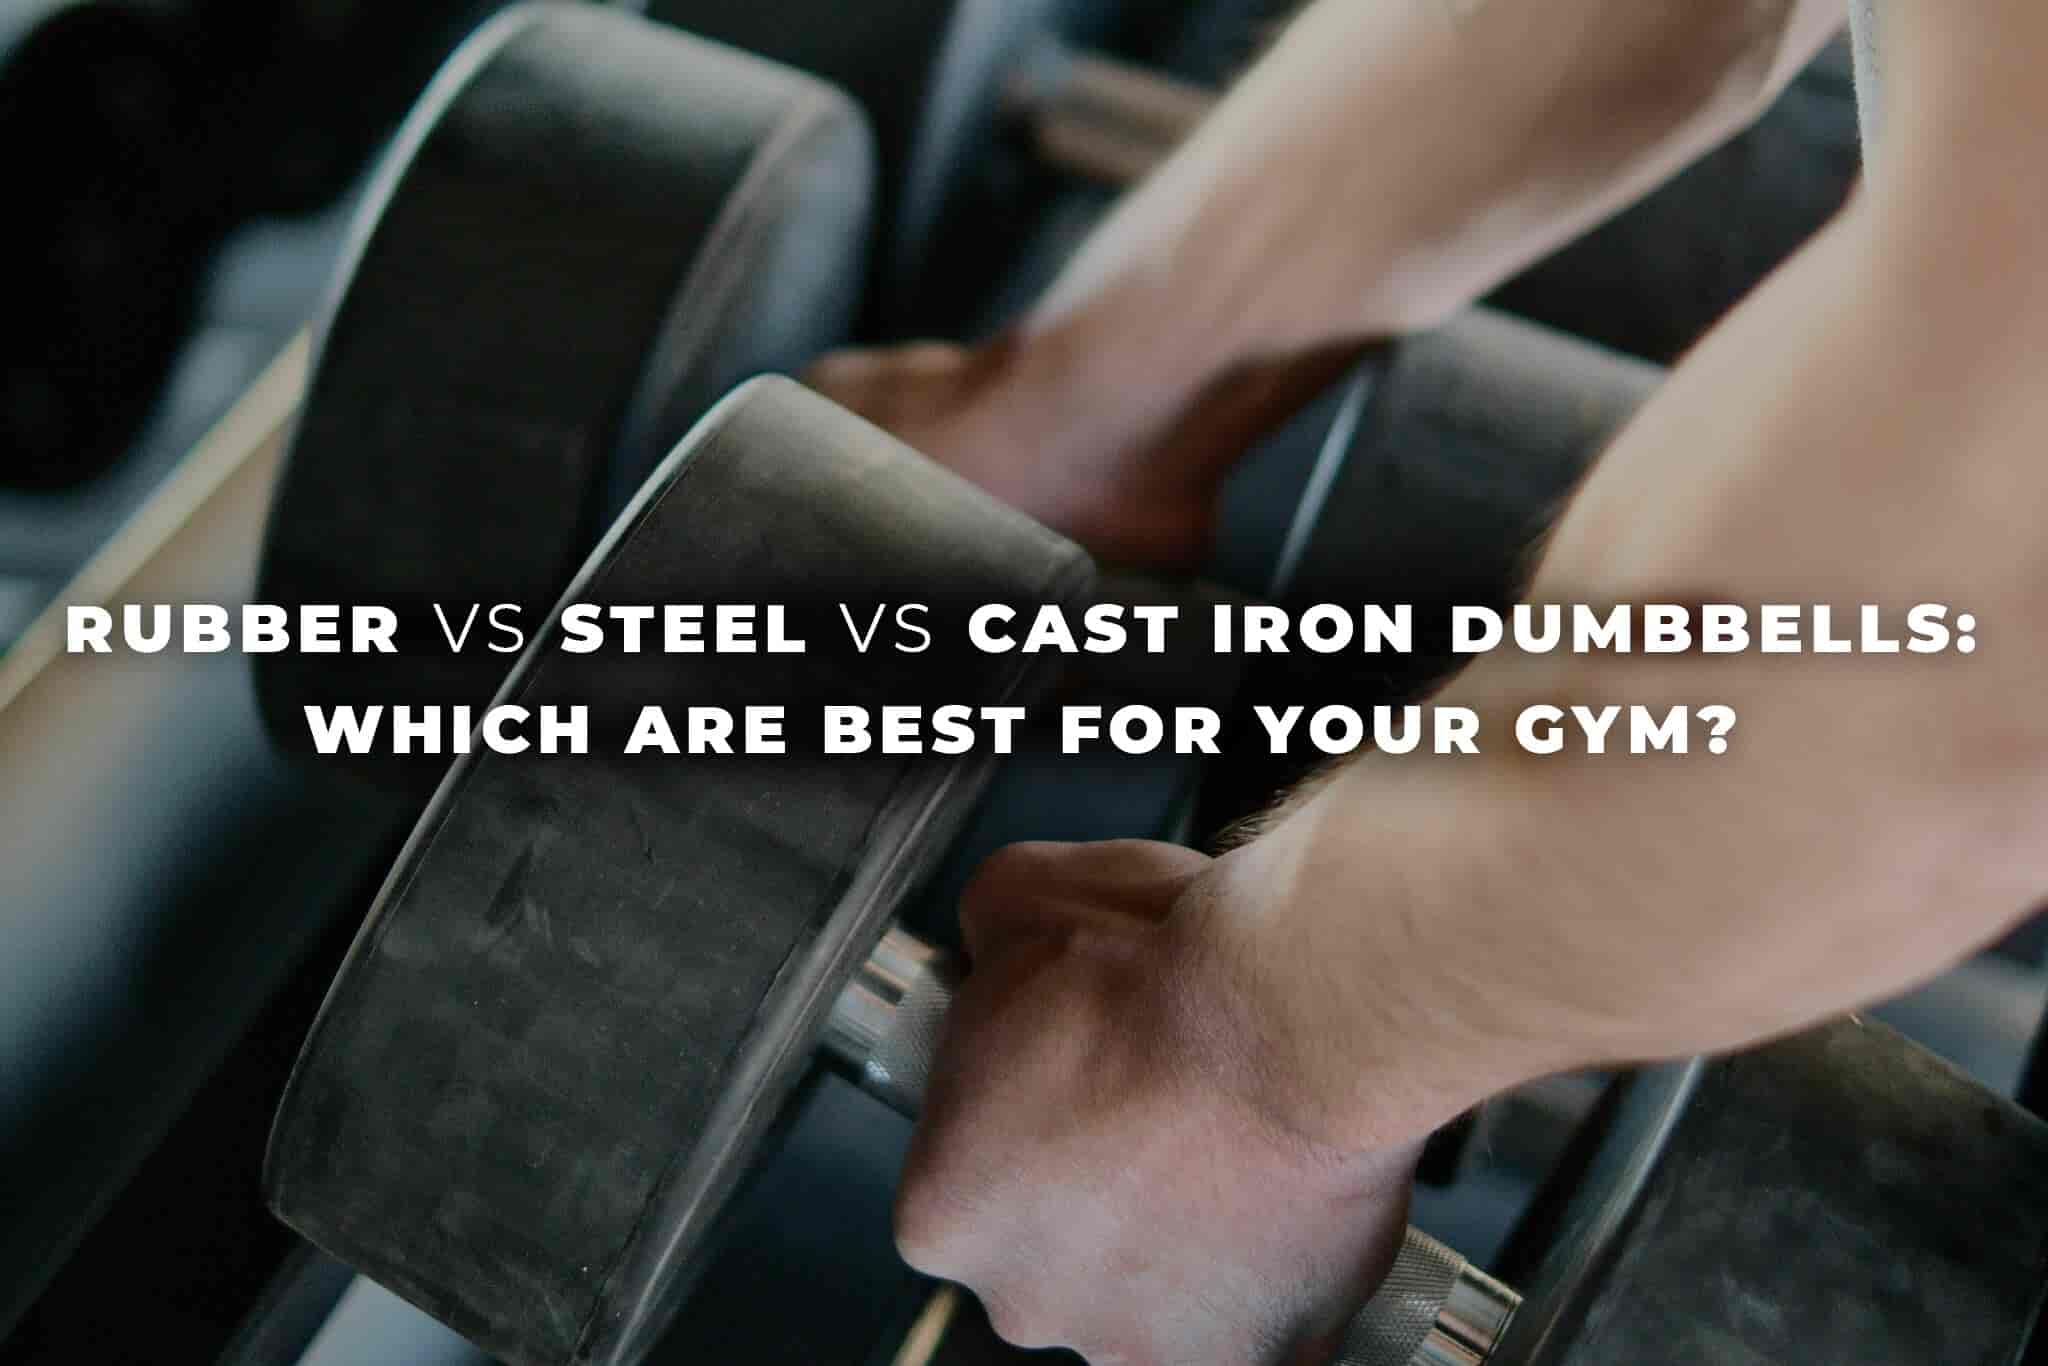 Rubber vs steel vs cast iron dumbbells: Which are best for your gym?